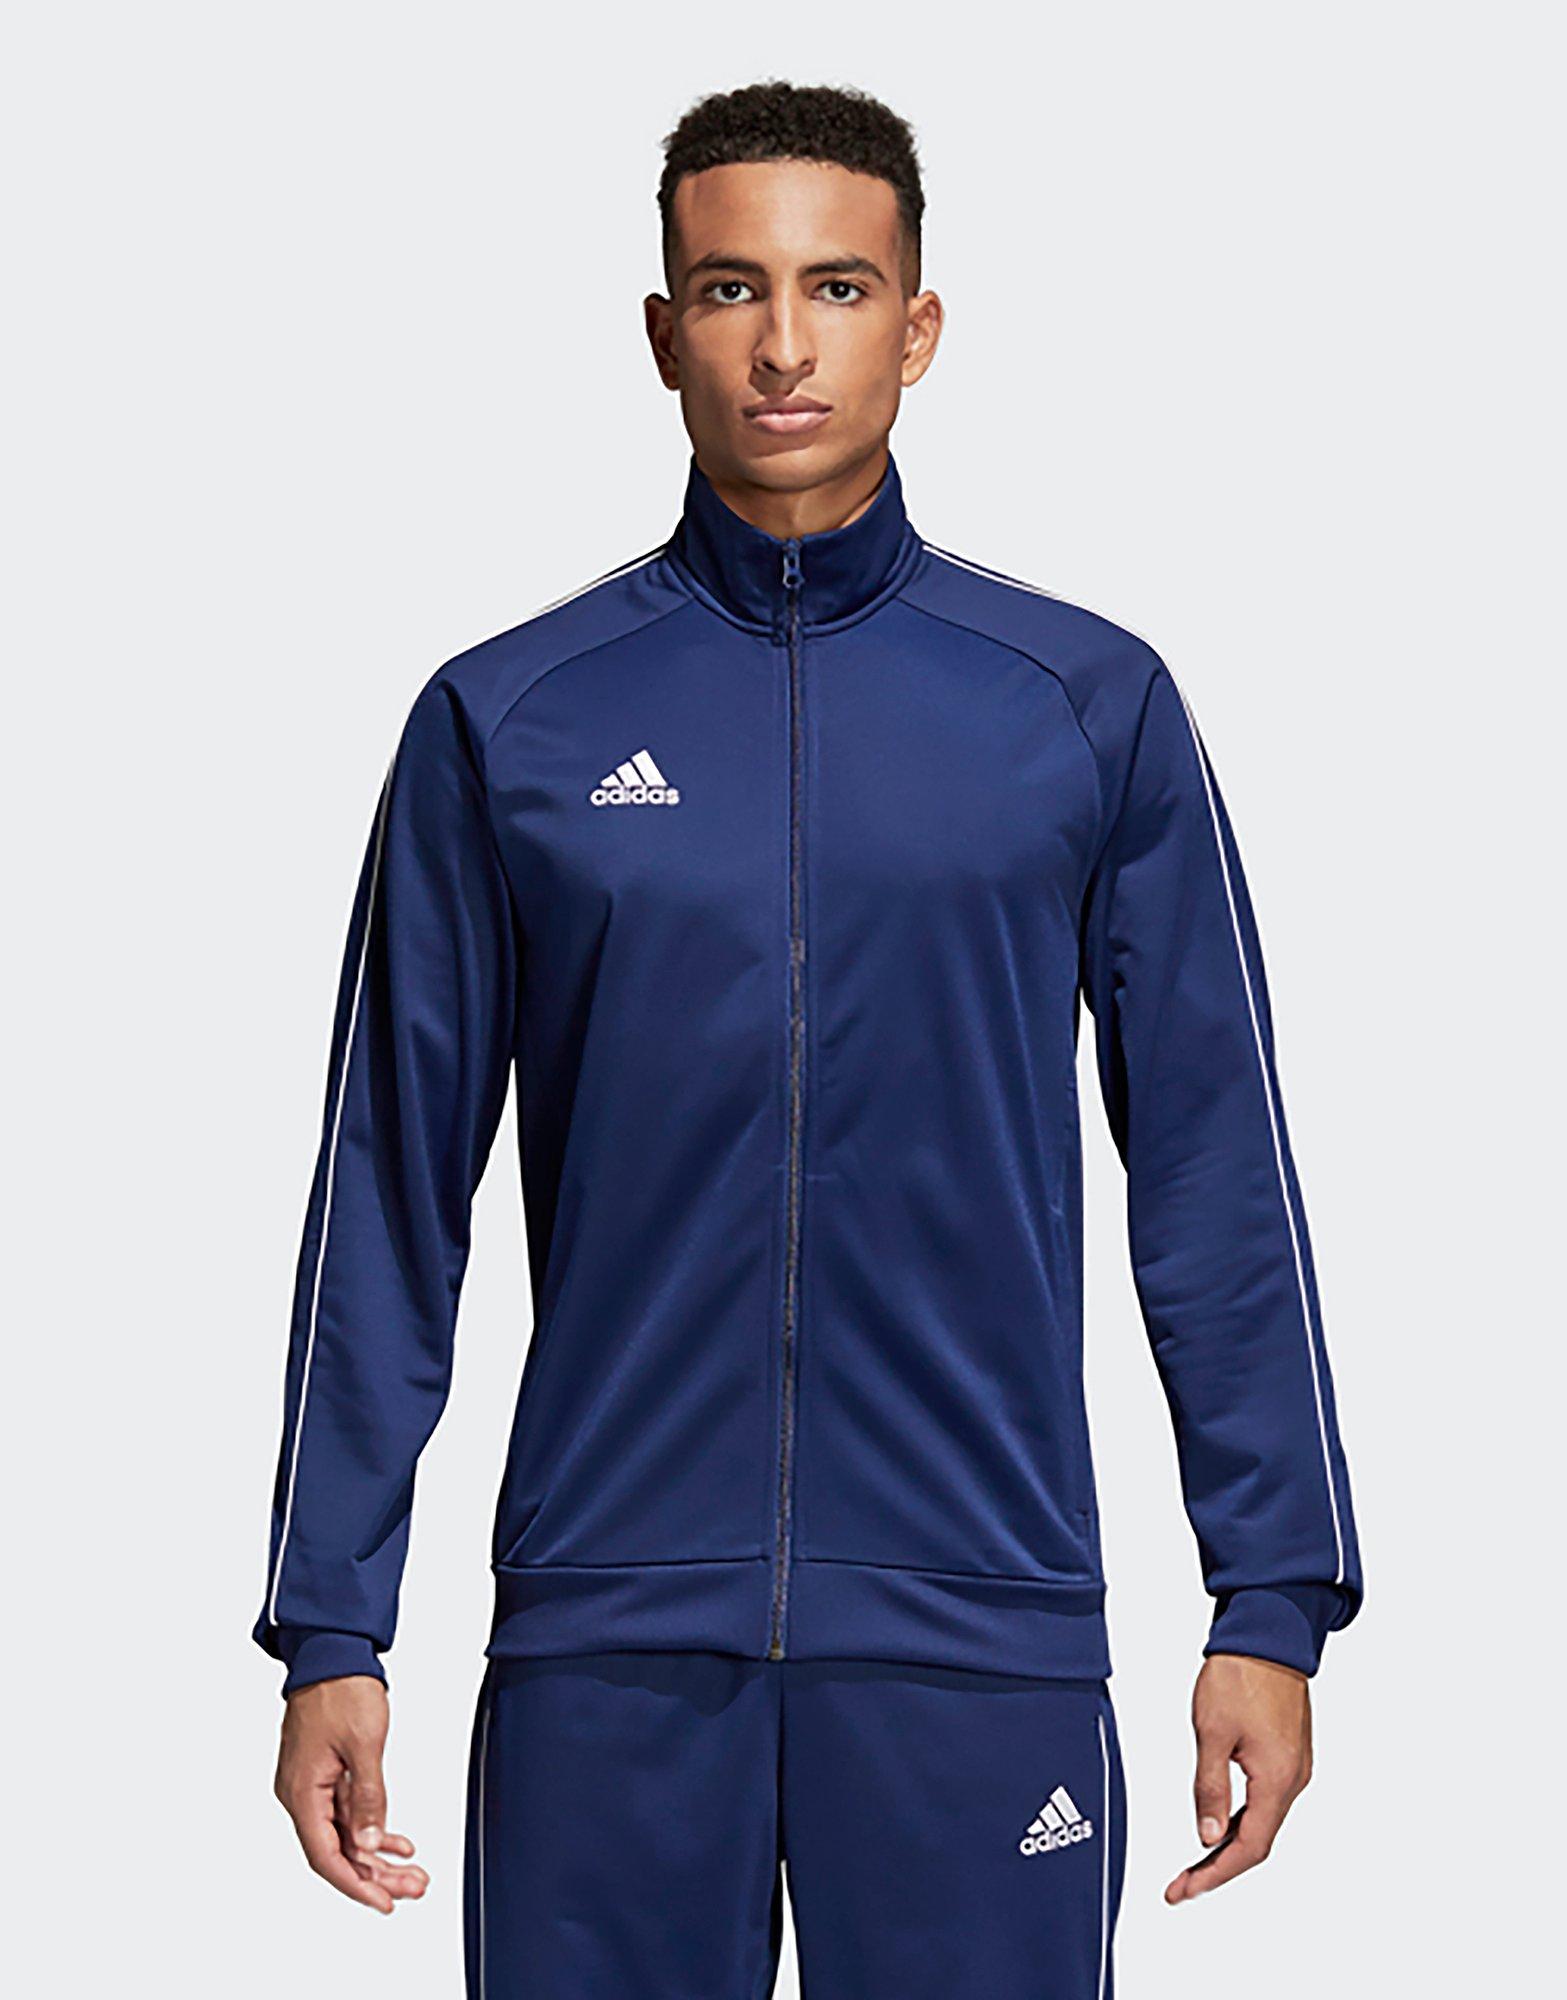 adidas performance core 18 track top